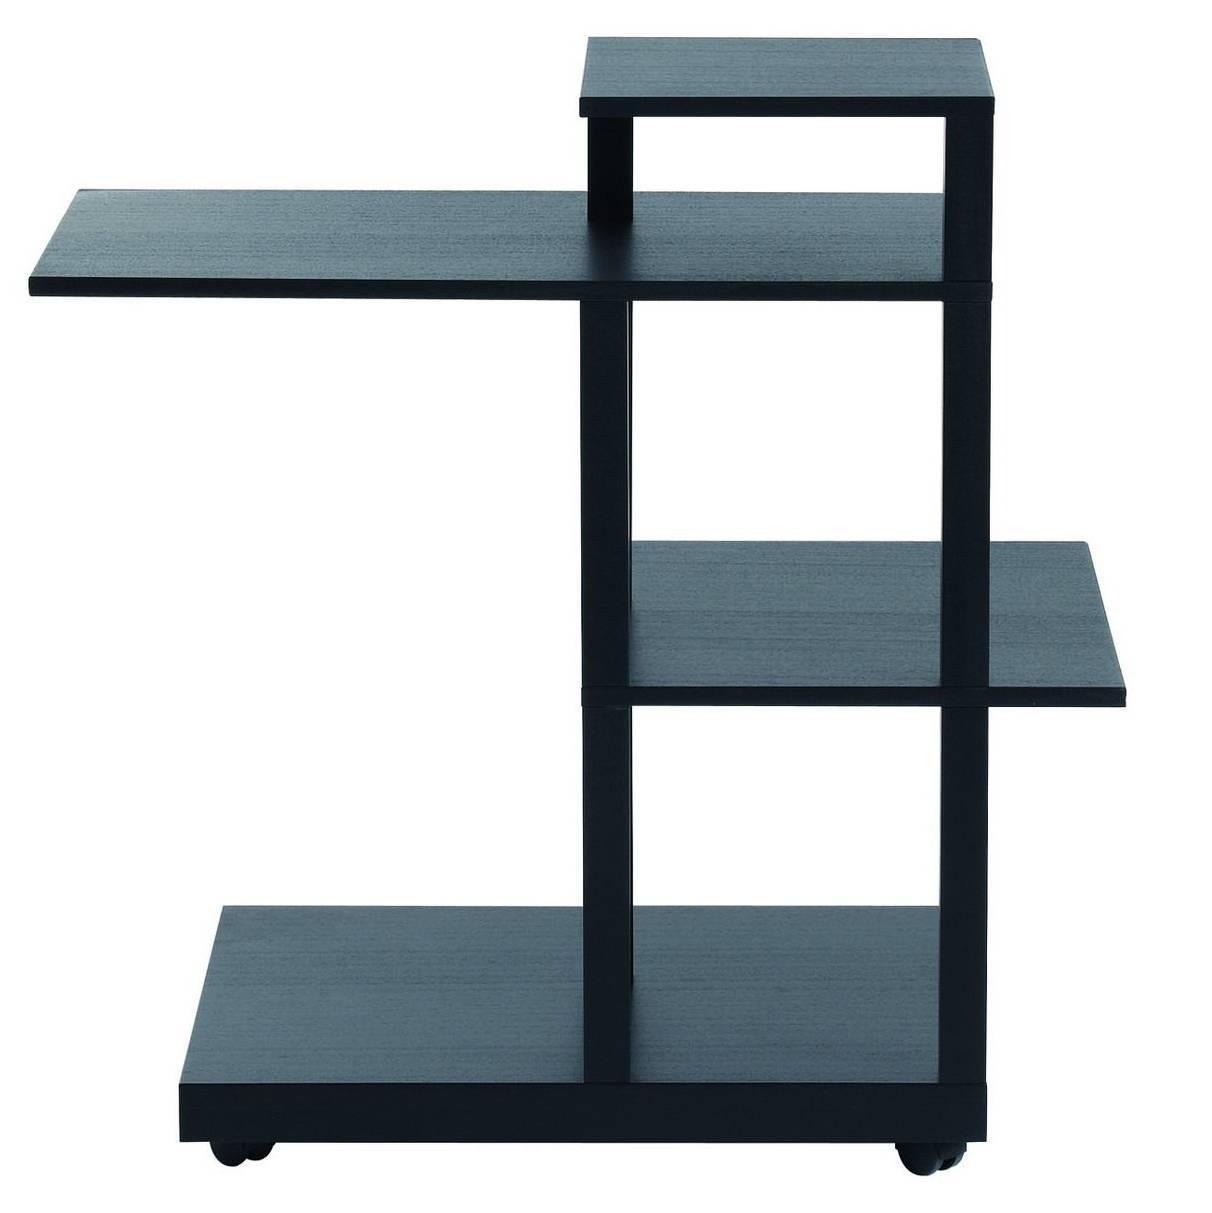 "Mak" Solid Wood and Ebonized Shelves Castored Table by G. Chigiotti for Driade For Sale